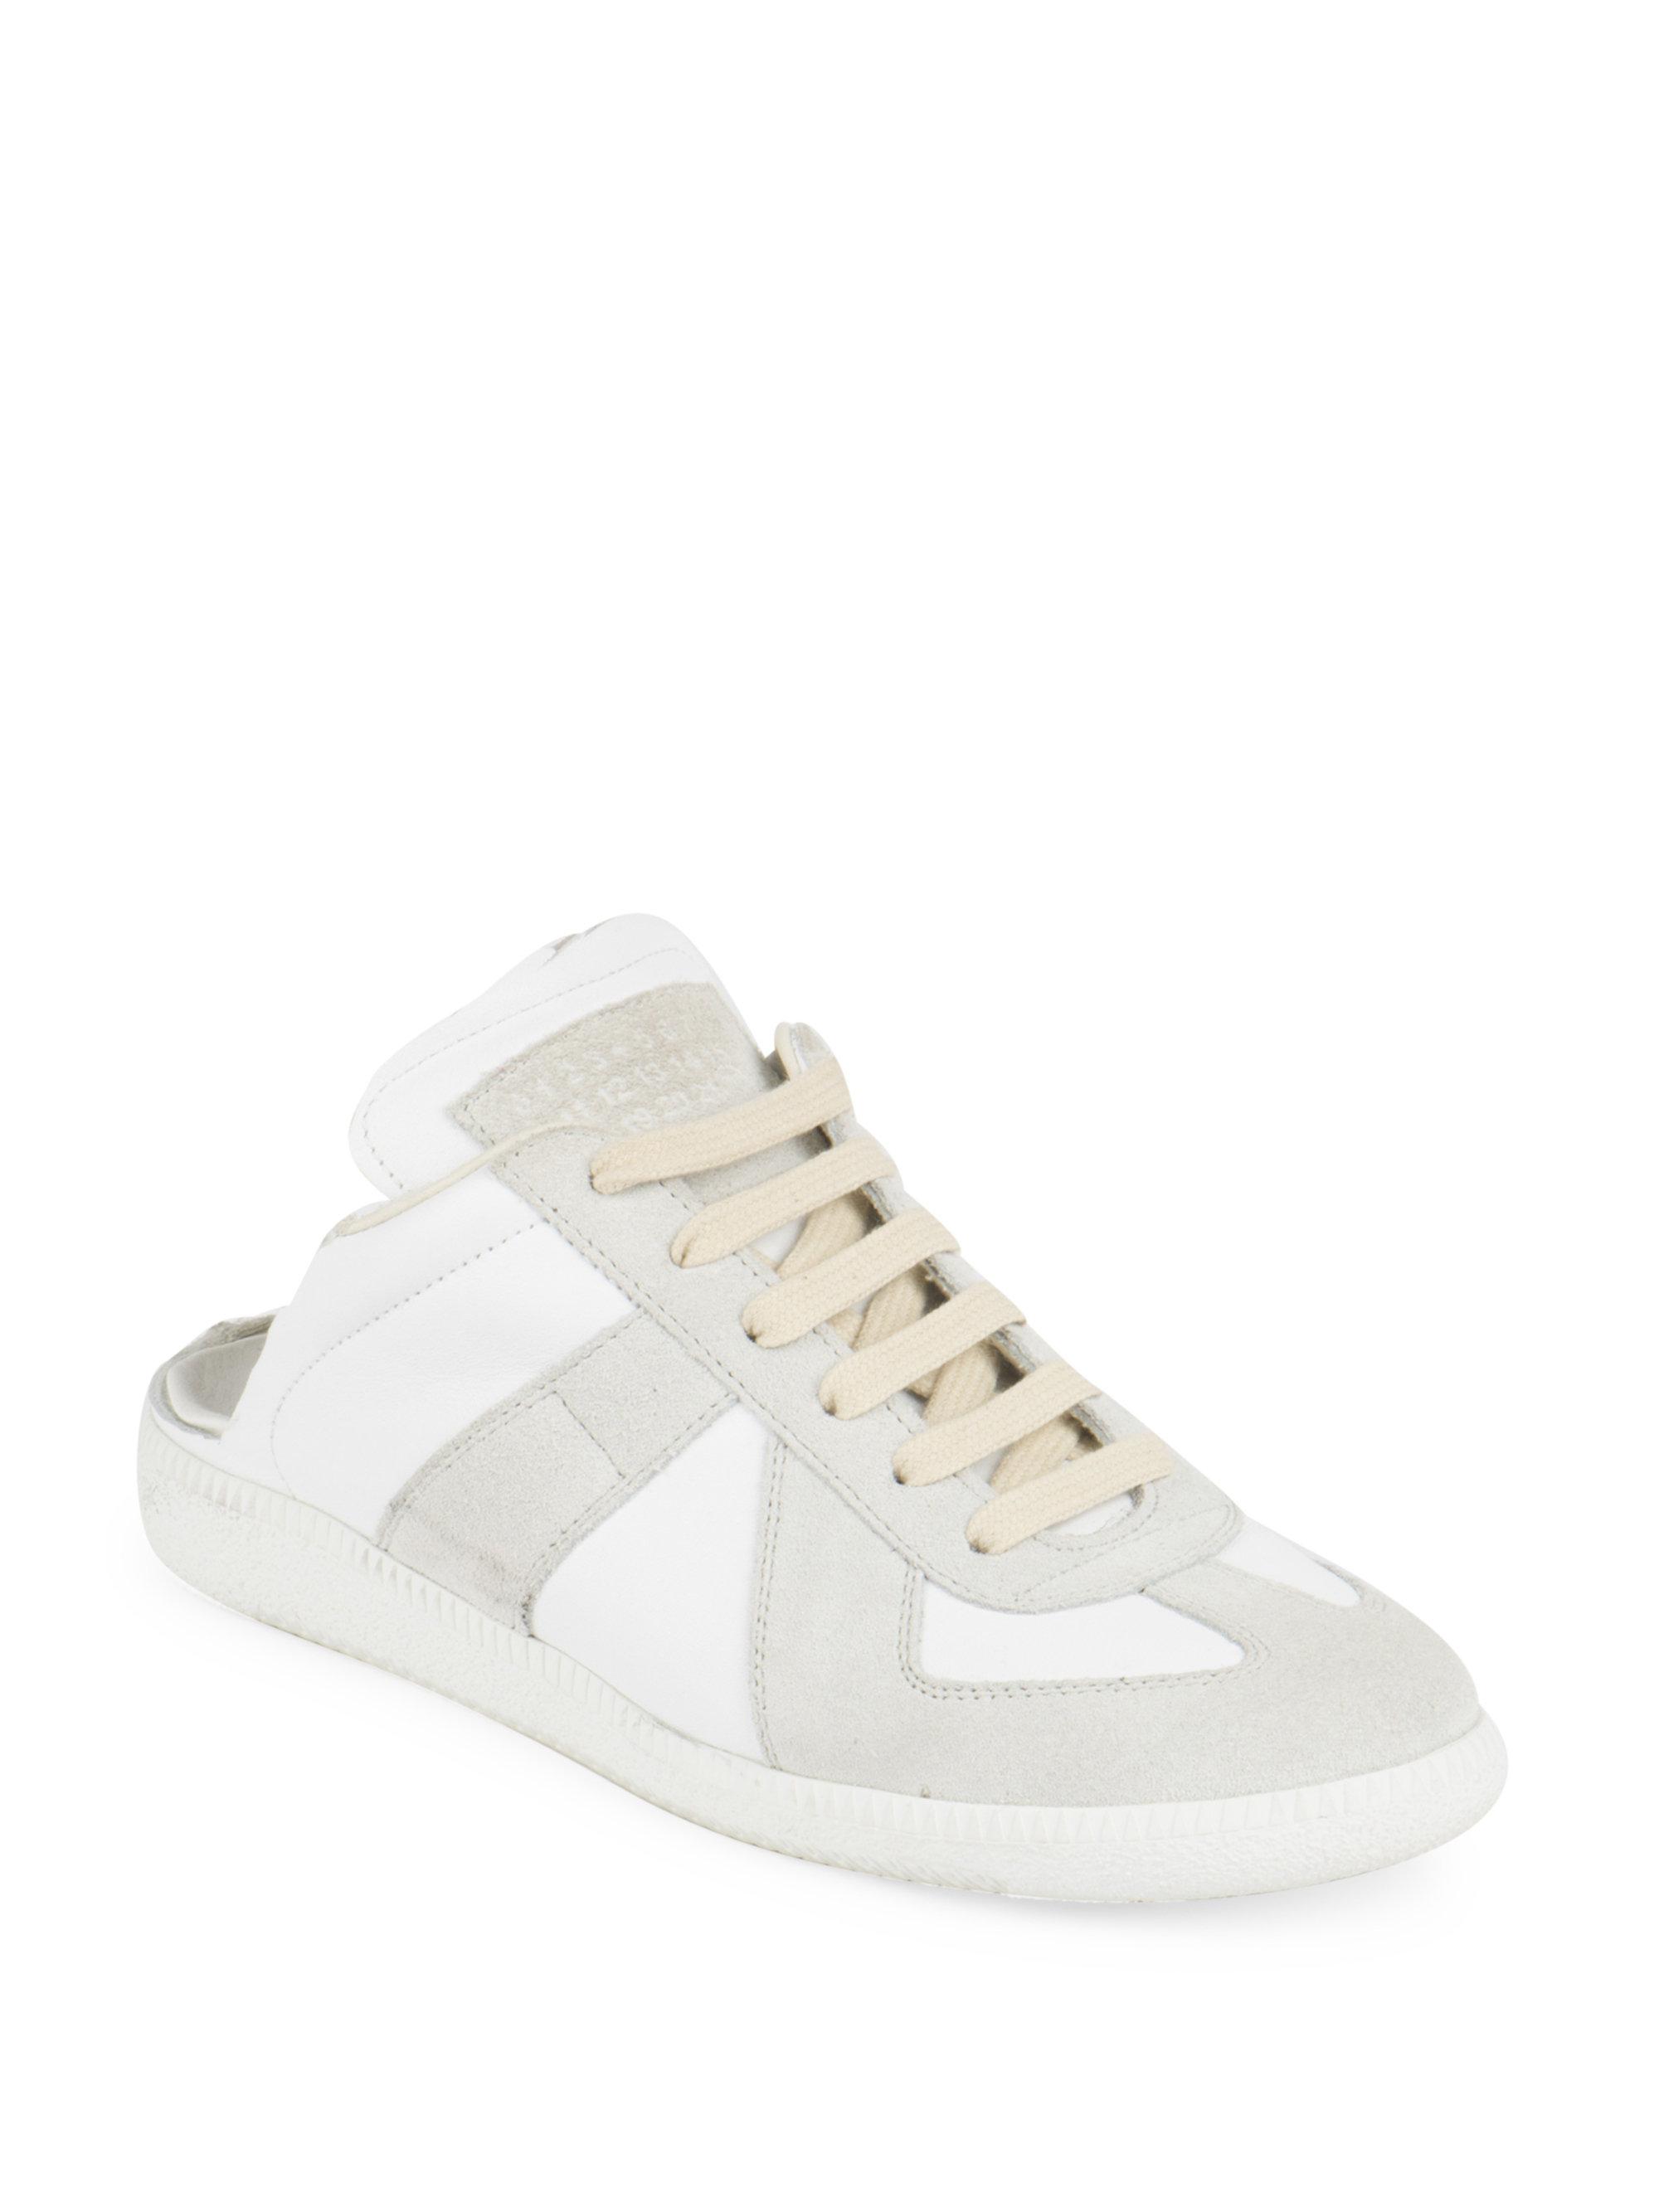 Maison Margiela Leather & Suede Mule Sneakers in White - Lyst